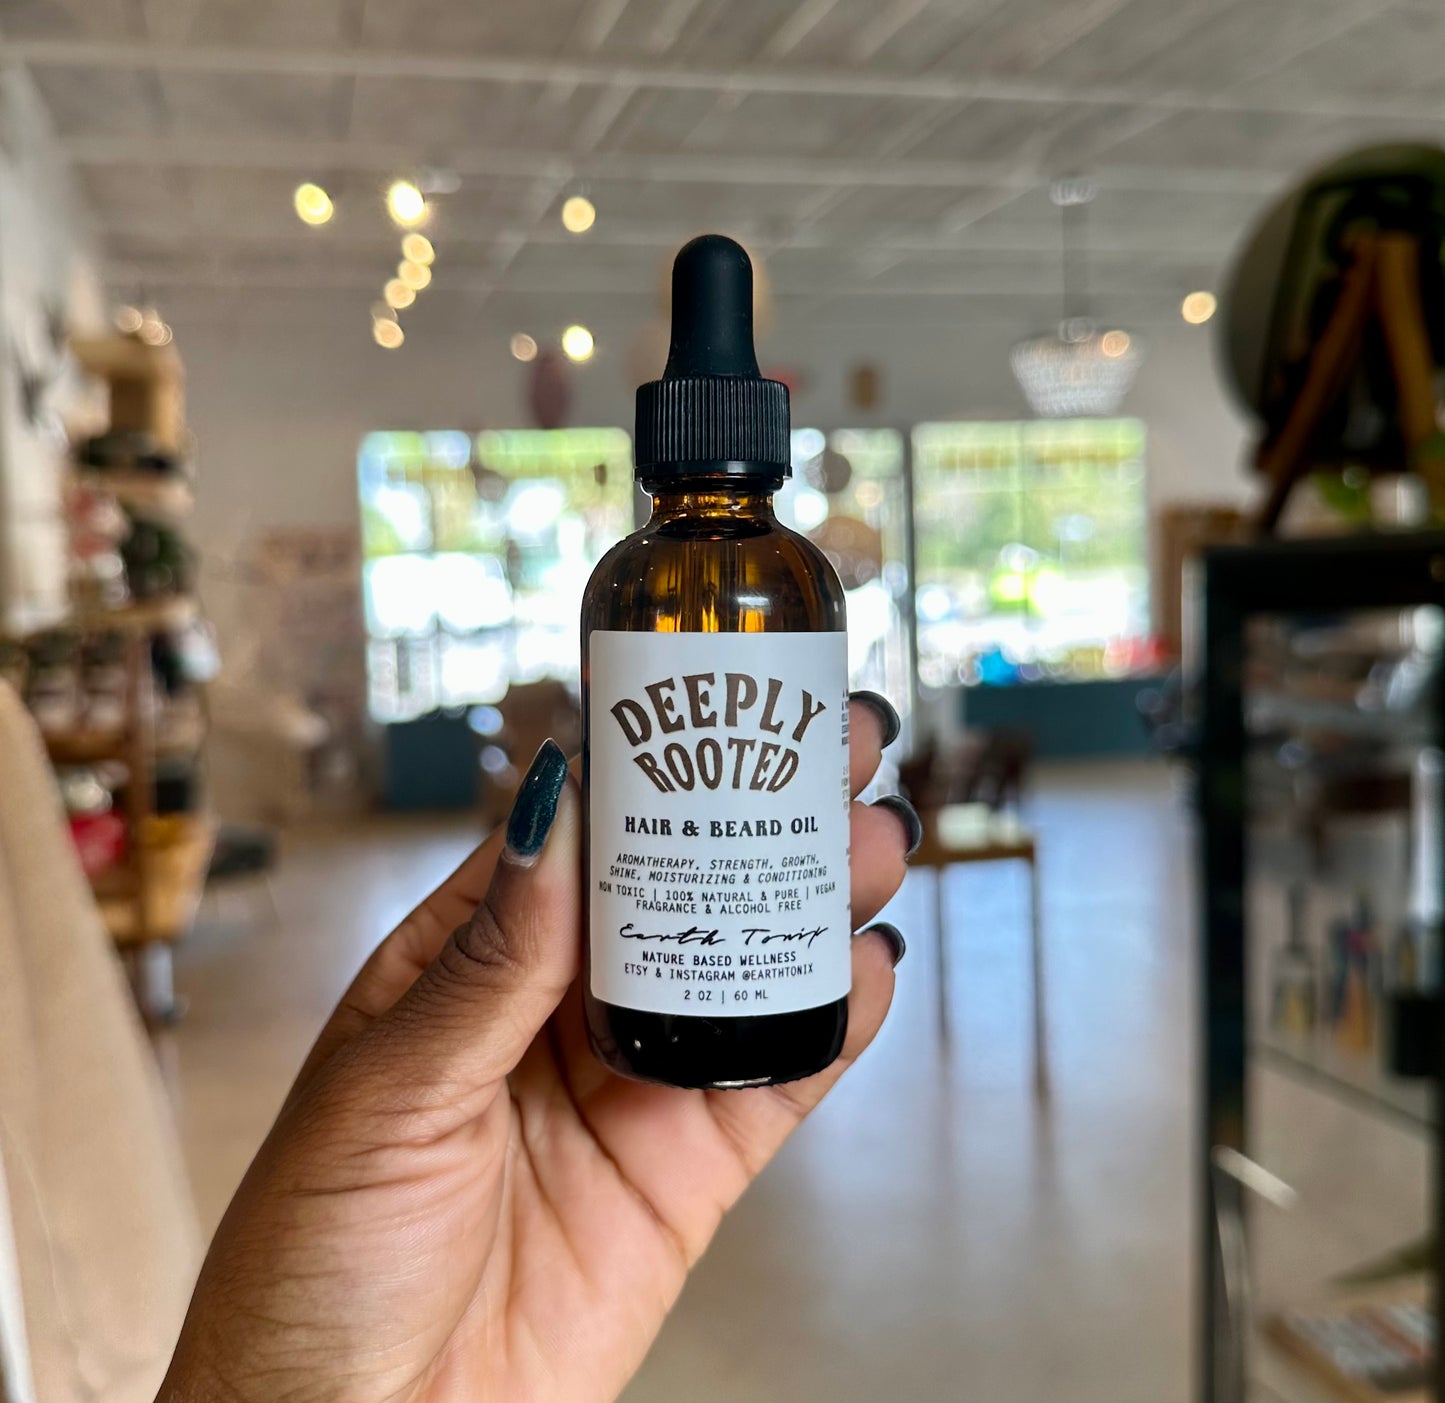 Deeply Rooted Hair and Beard Oil